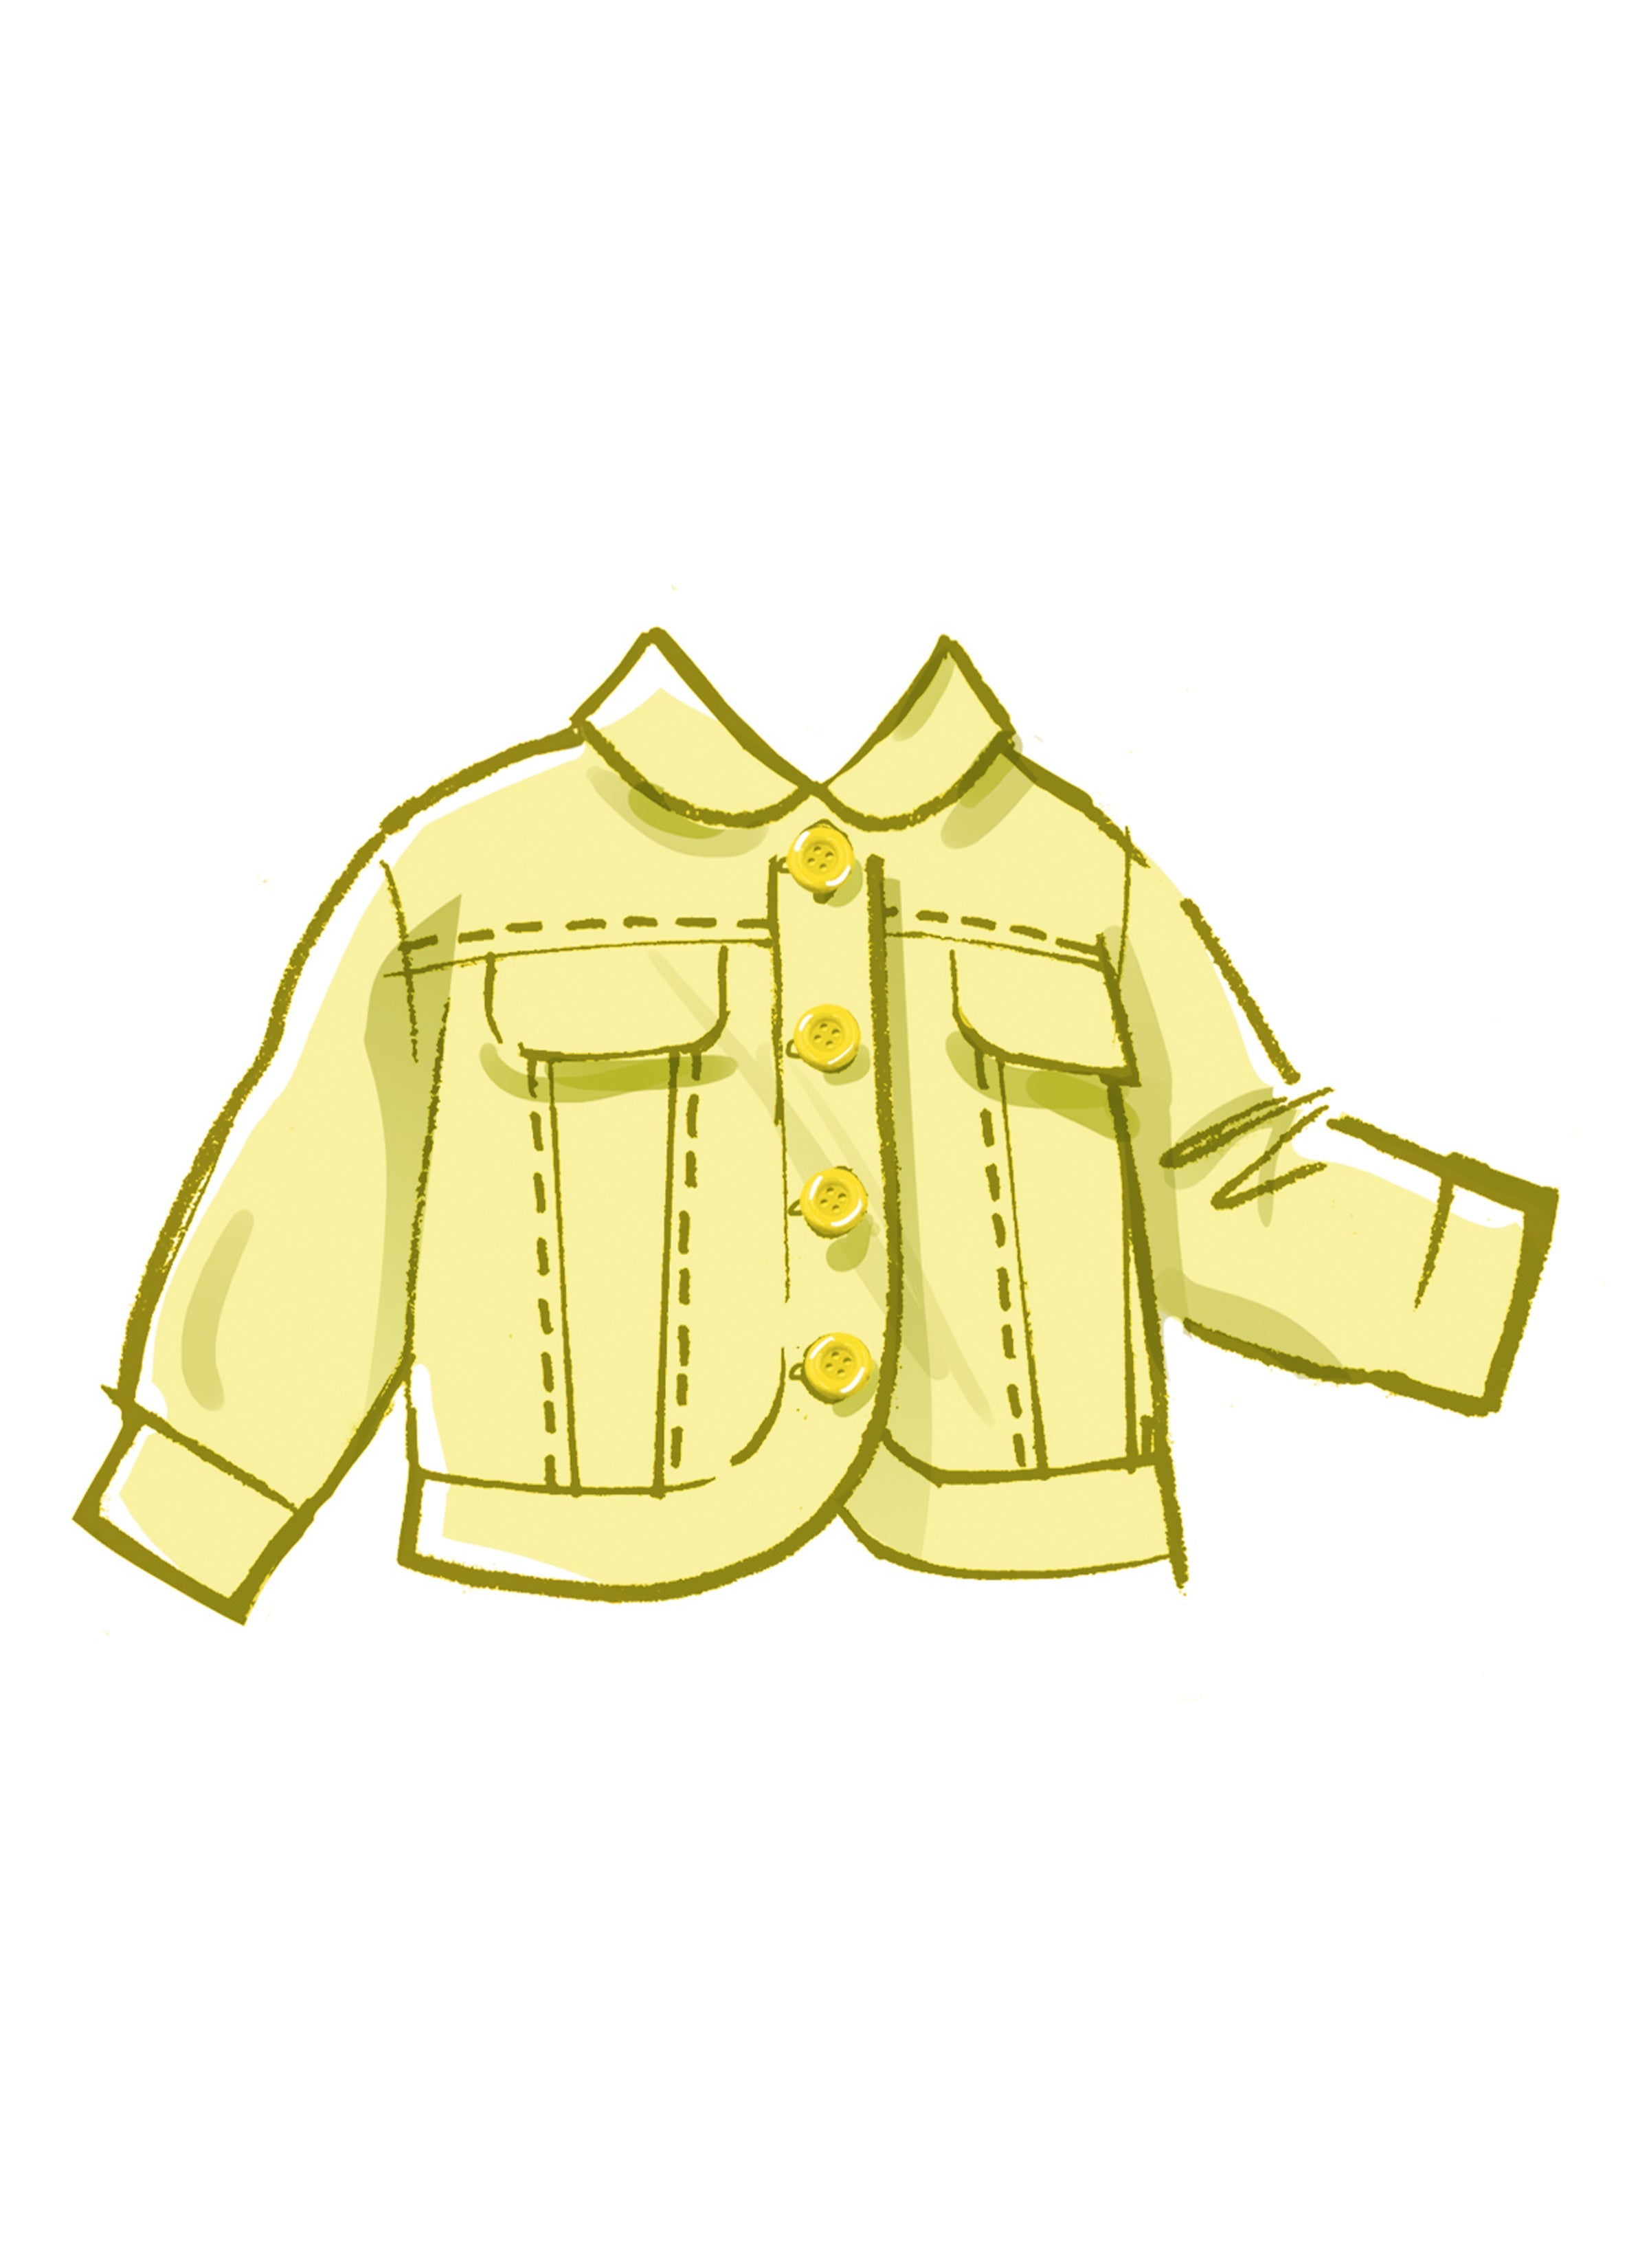 McCall's Sewing Pattern 8487 Baby's' Vest, Jacket and Overalls from Jaycotts Sewing Supplies